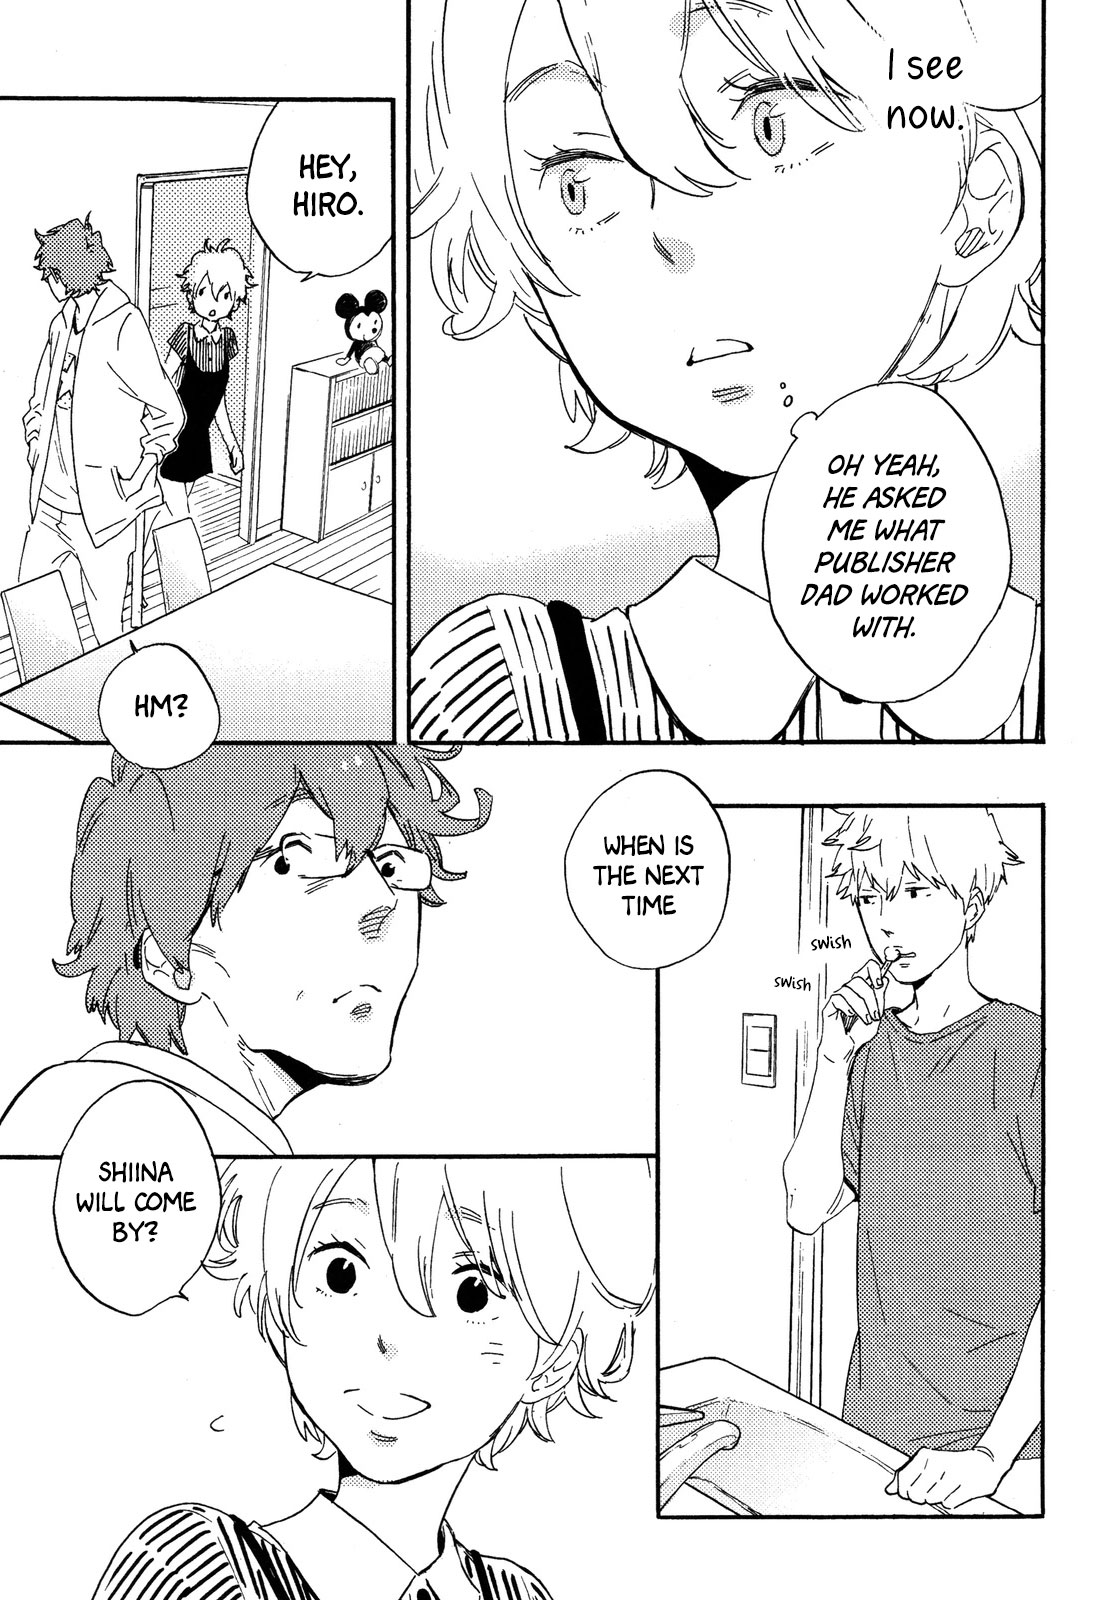 Flowers and Pints Vol. 1 Ch. 6